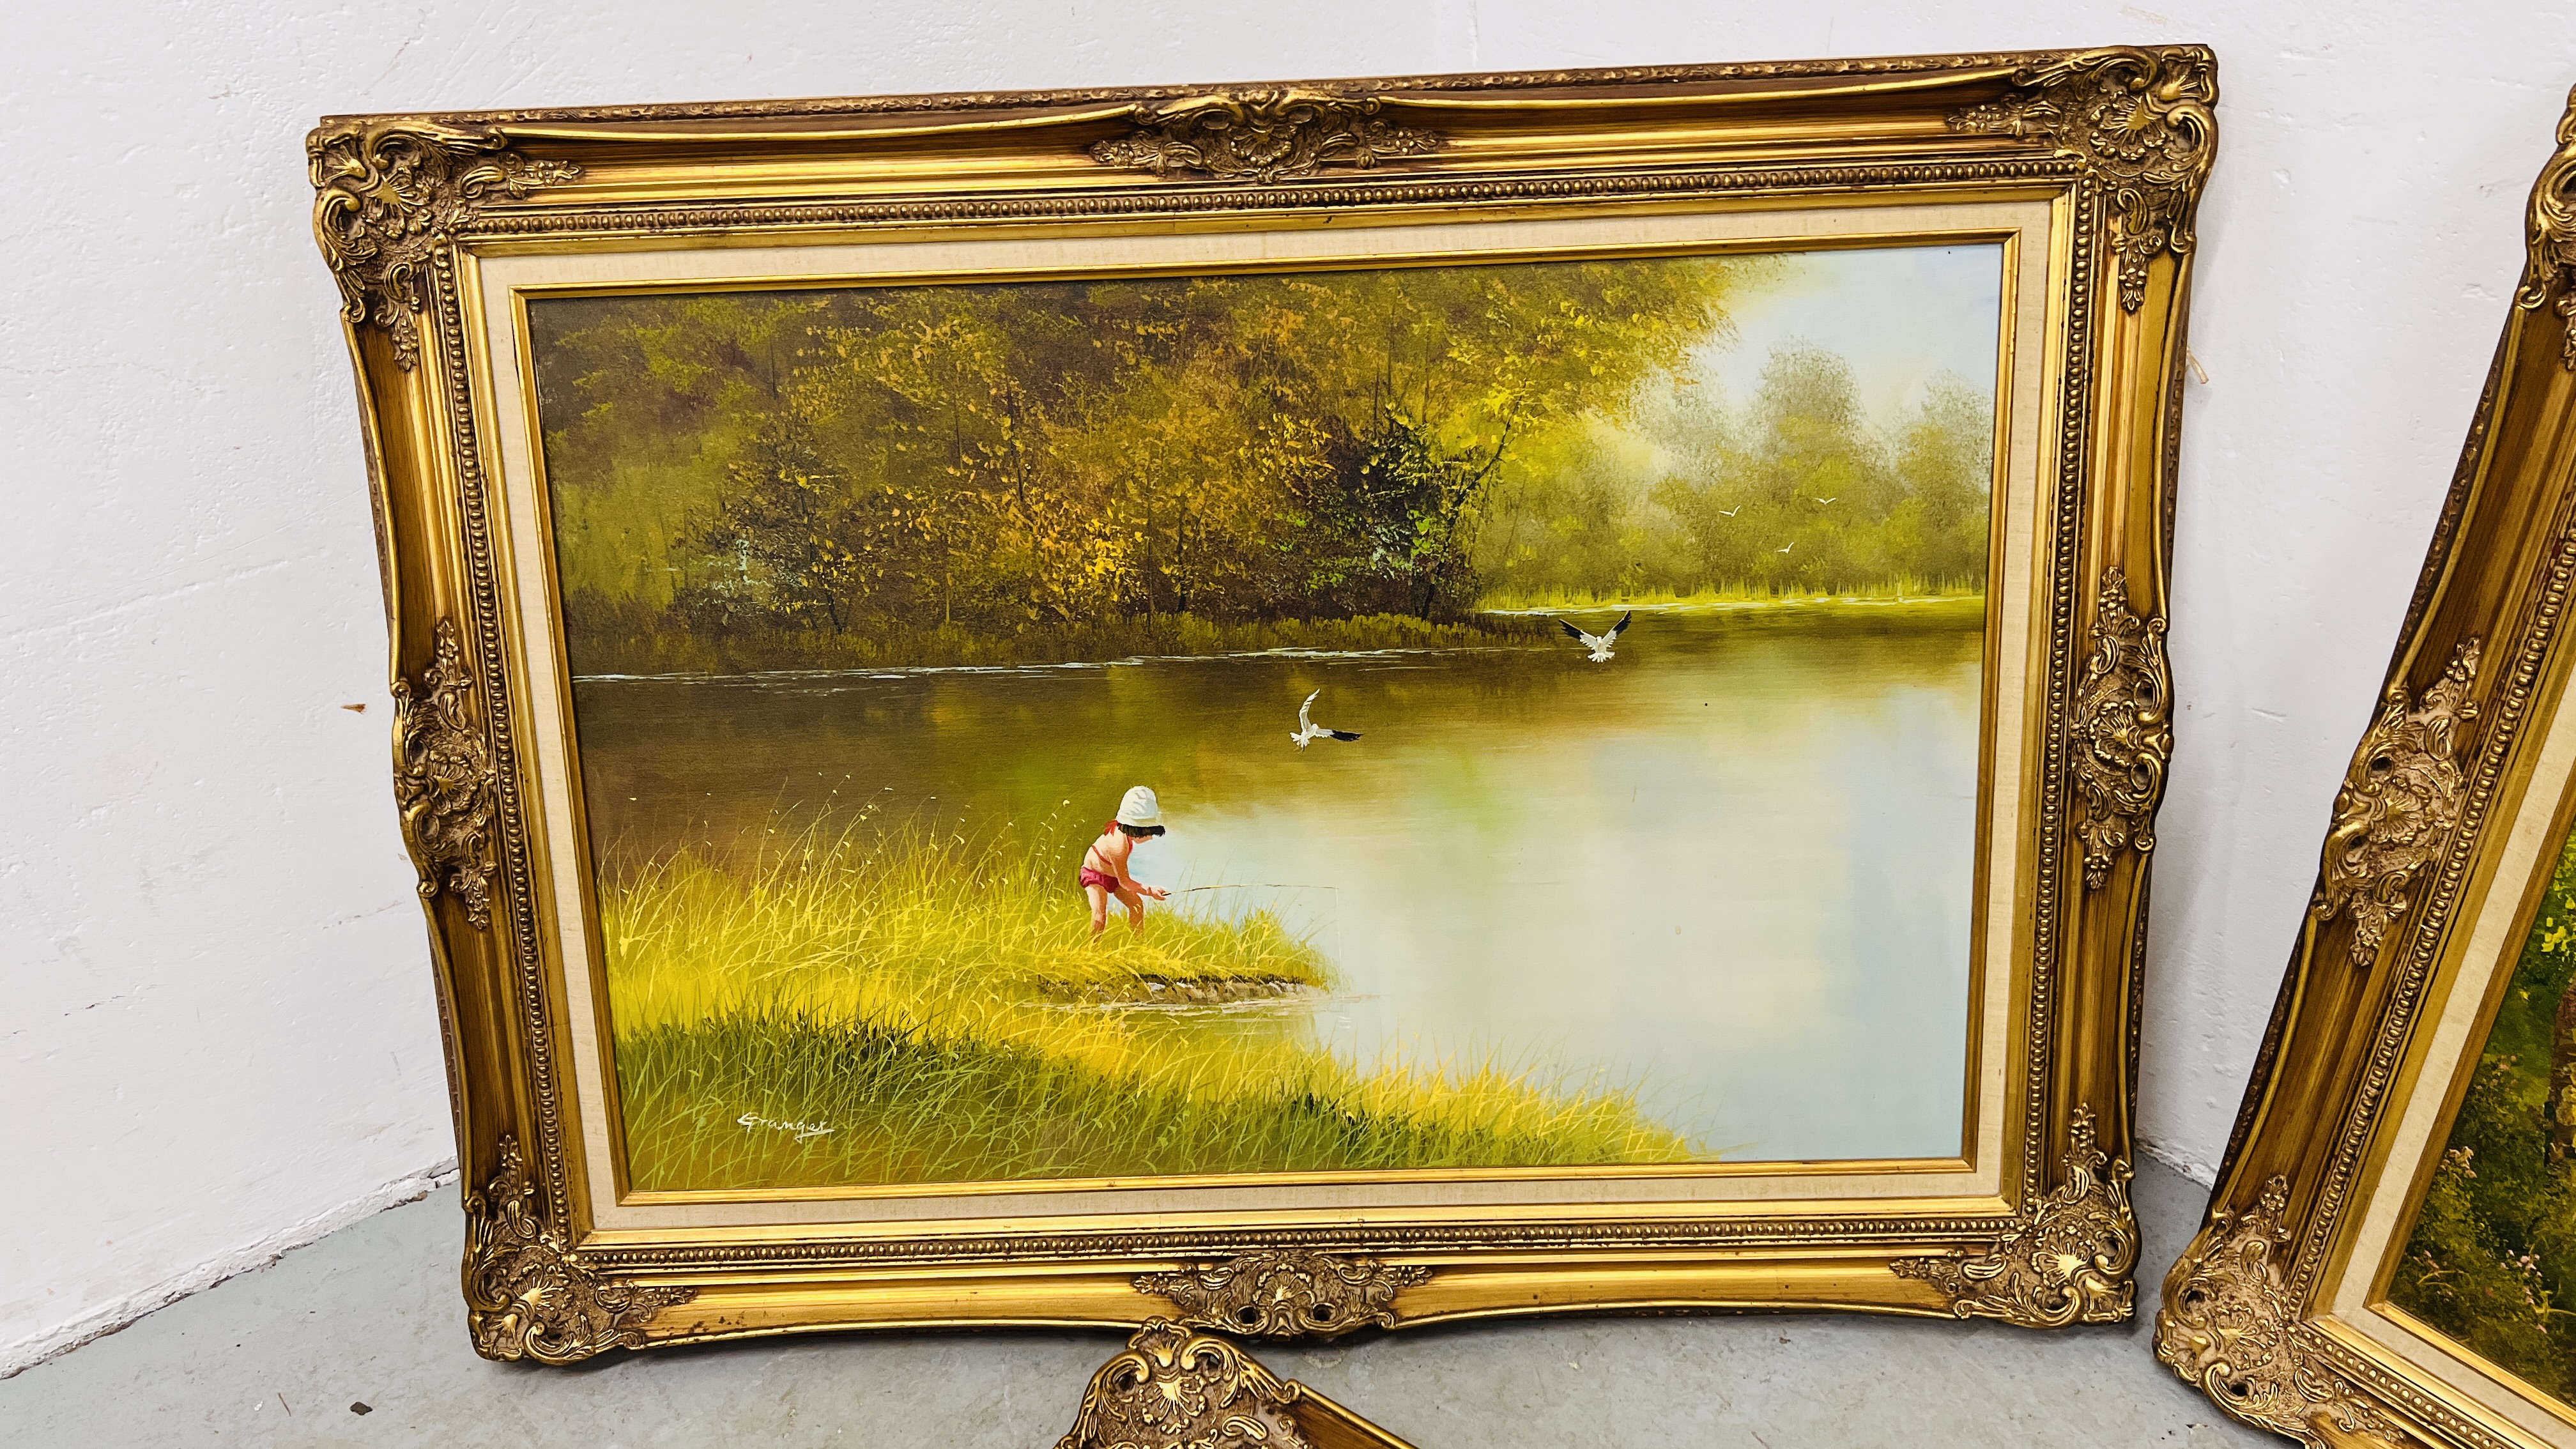 A GROUP OF 3 GILT FRAMED LANDSCAPE AND RIVER PICTURES, OIL ON CANVAS - W 112CM. X H 81.5CM. - Image 4 of 4